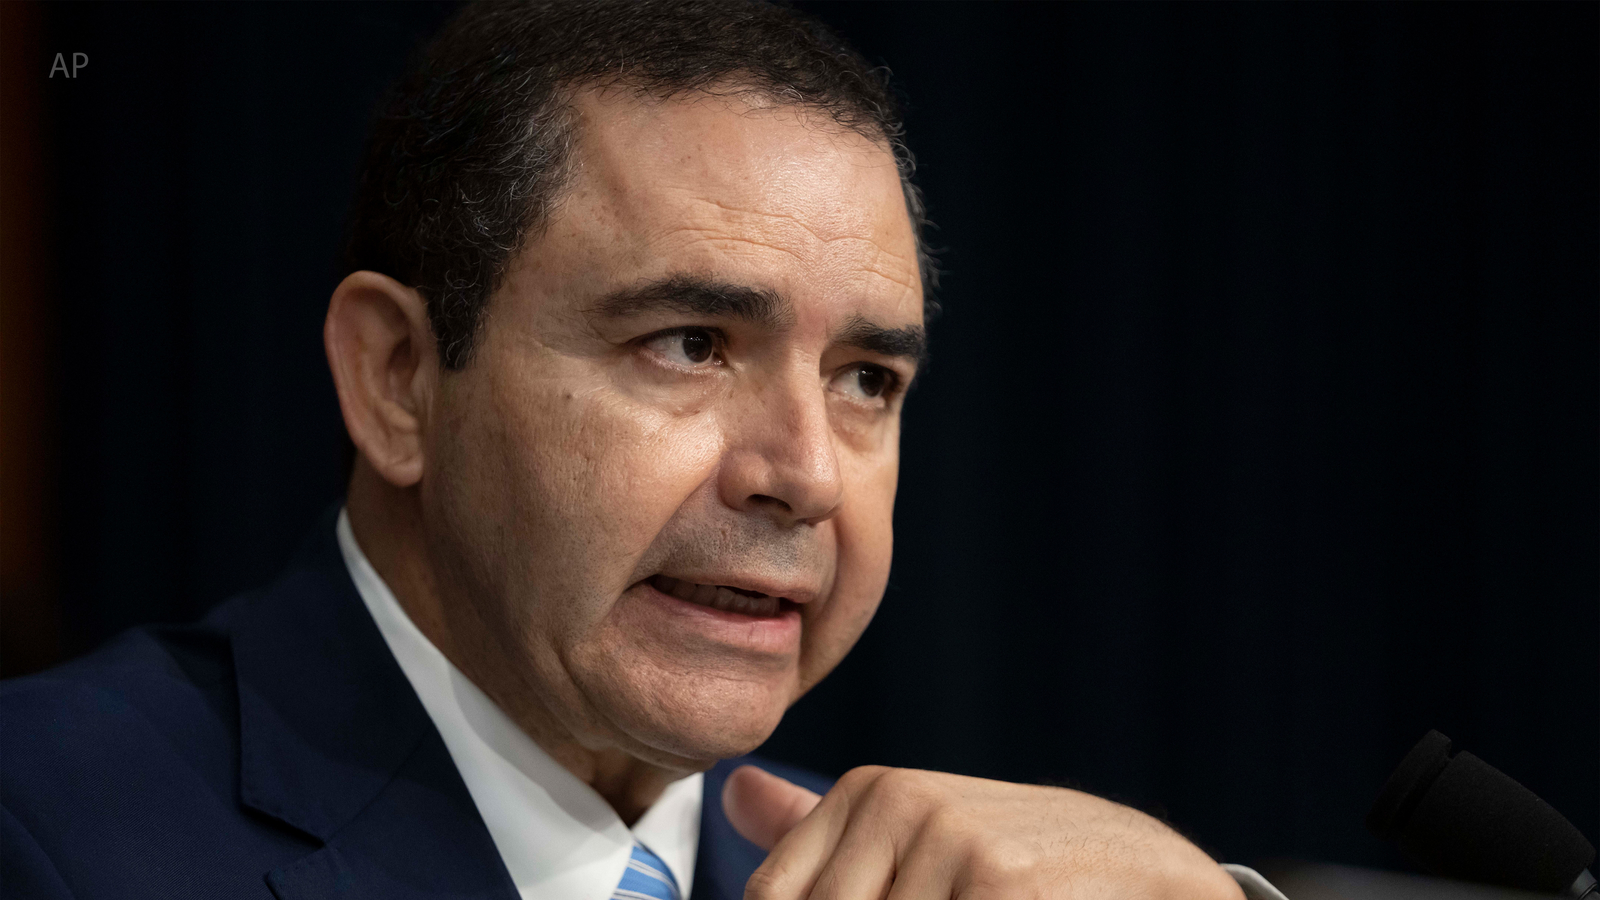 Henry Cuellar indictment: Houston woman is third person to plead guilty in probe related to bribery charges against Texas US Rep [Video]